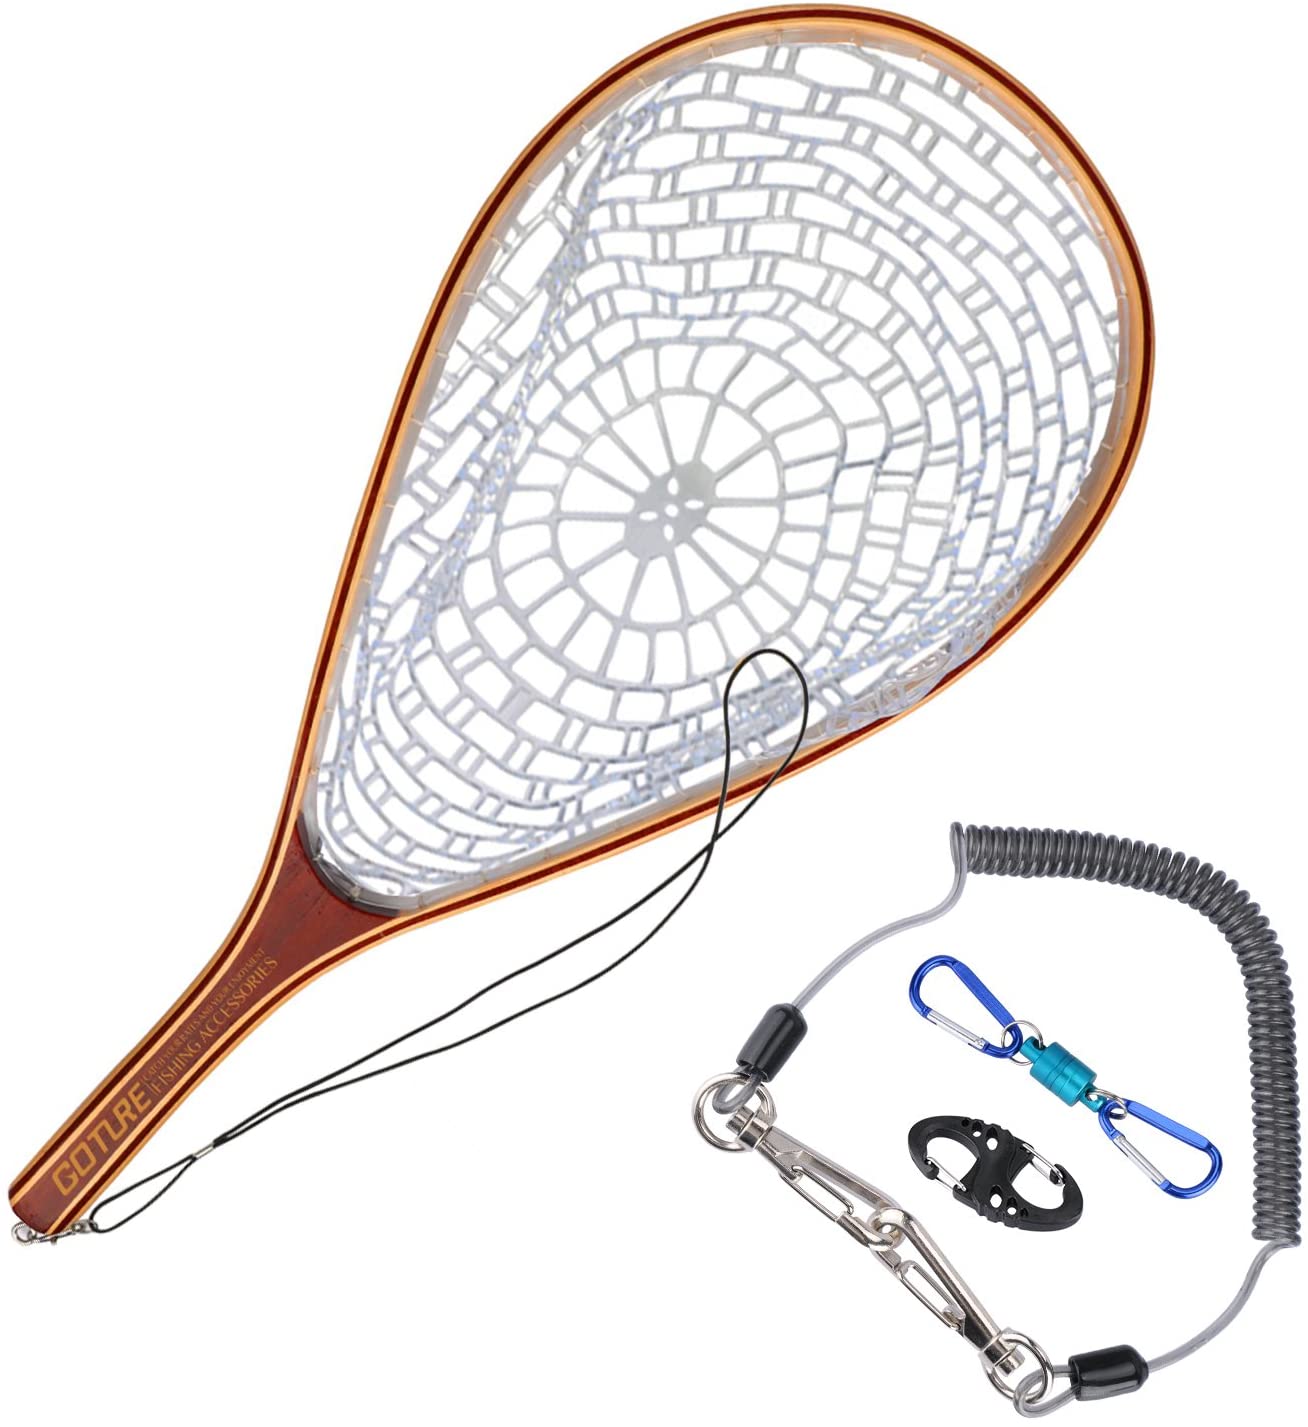 Goture Soft Rubber Mesh Wooden Frame Fly Fishing Landing Trout Net Success  - Clear Net with Blue Magnetic Buckles /Tear Drop